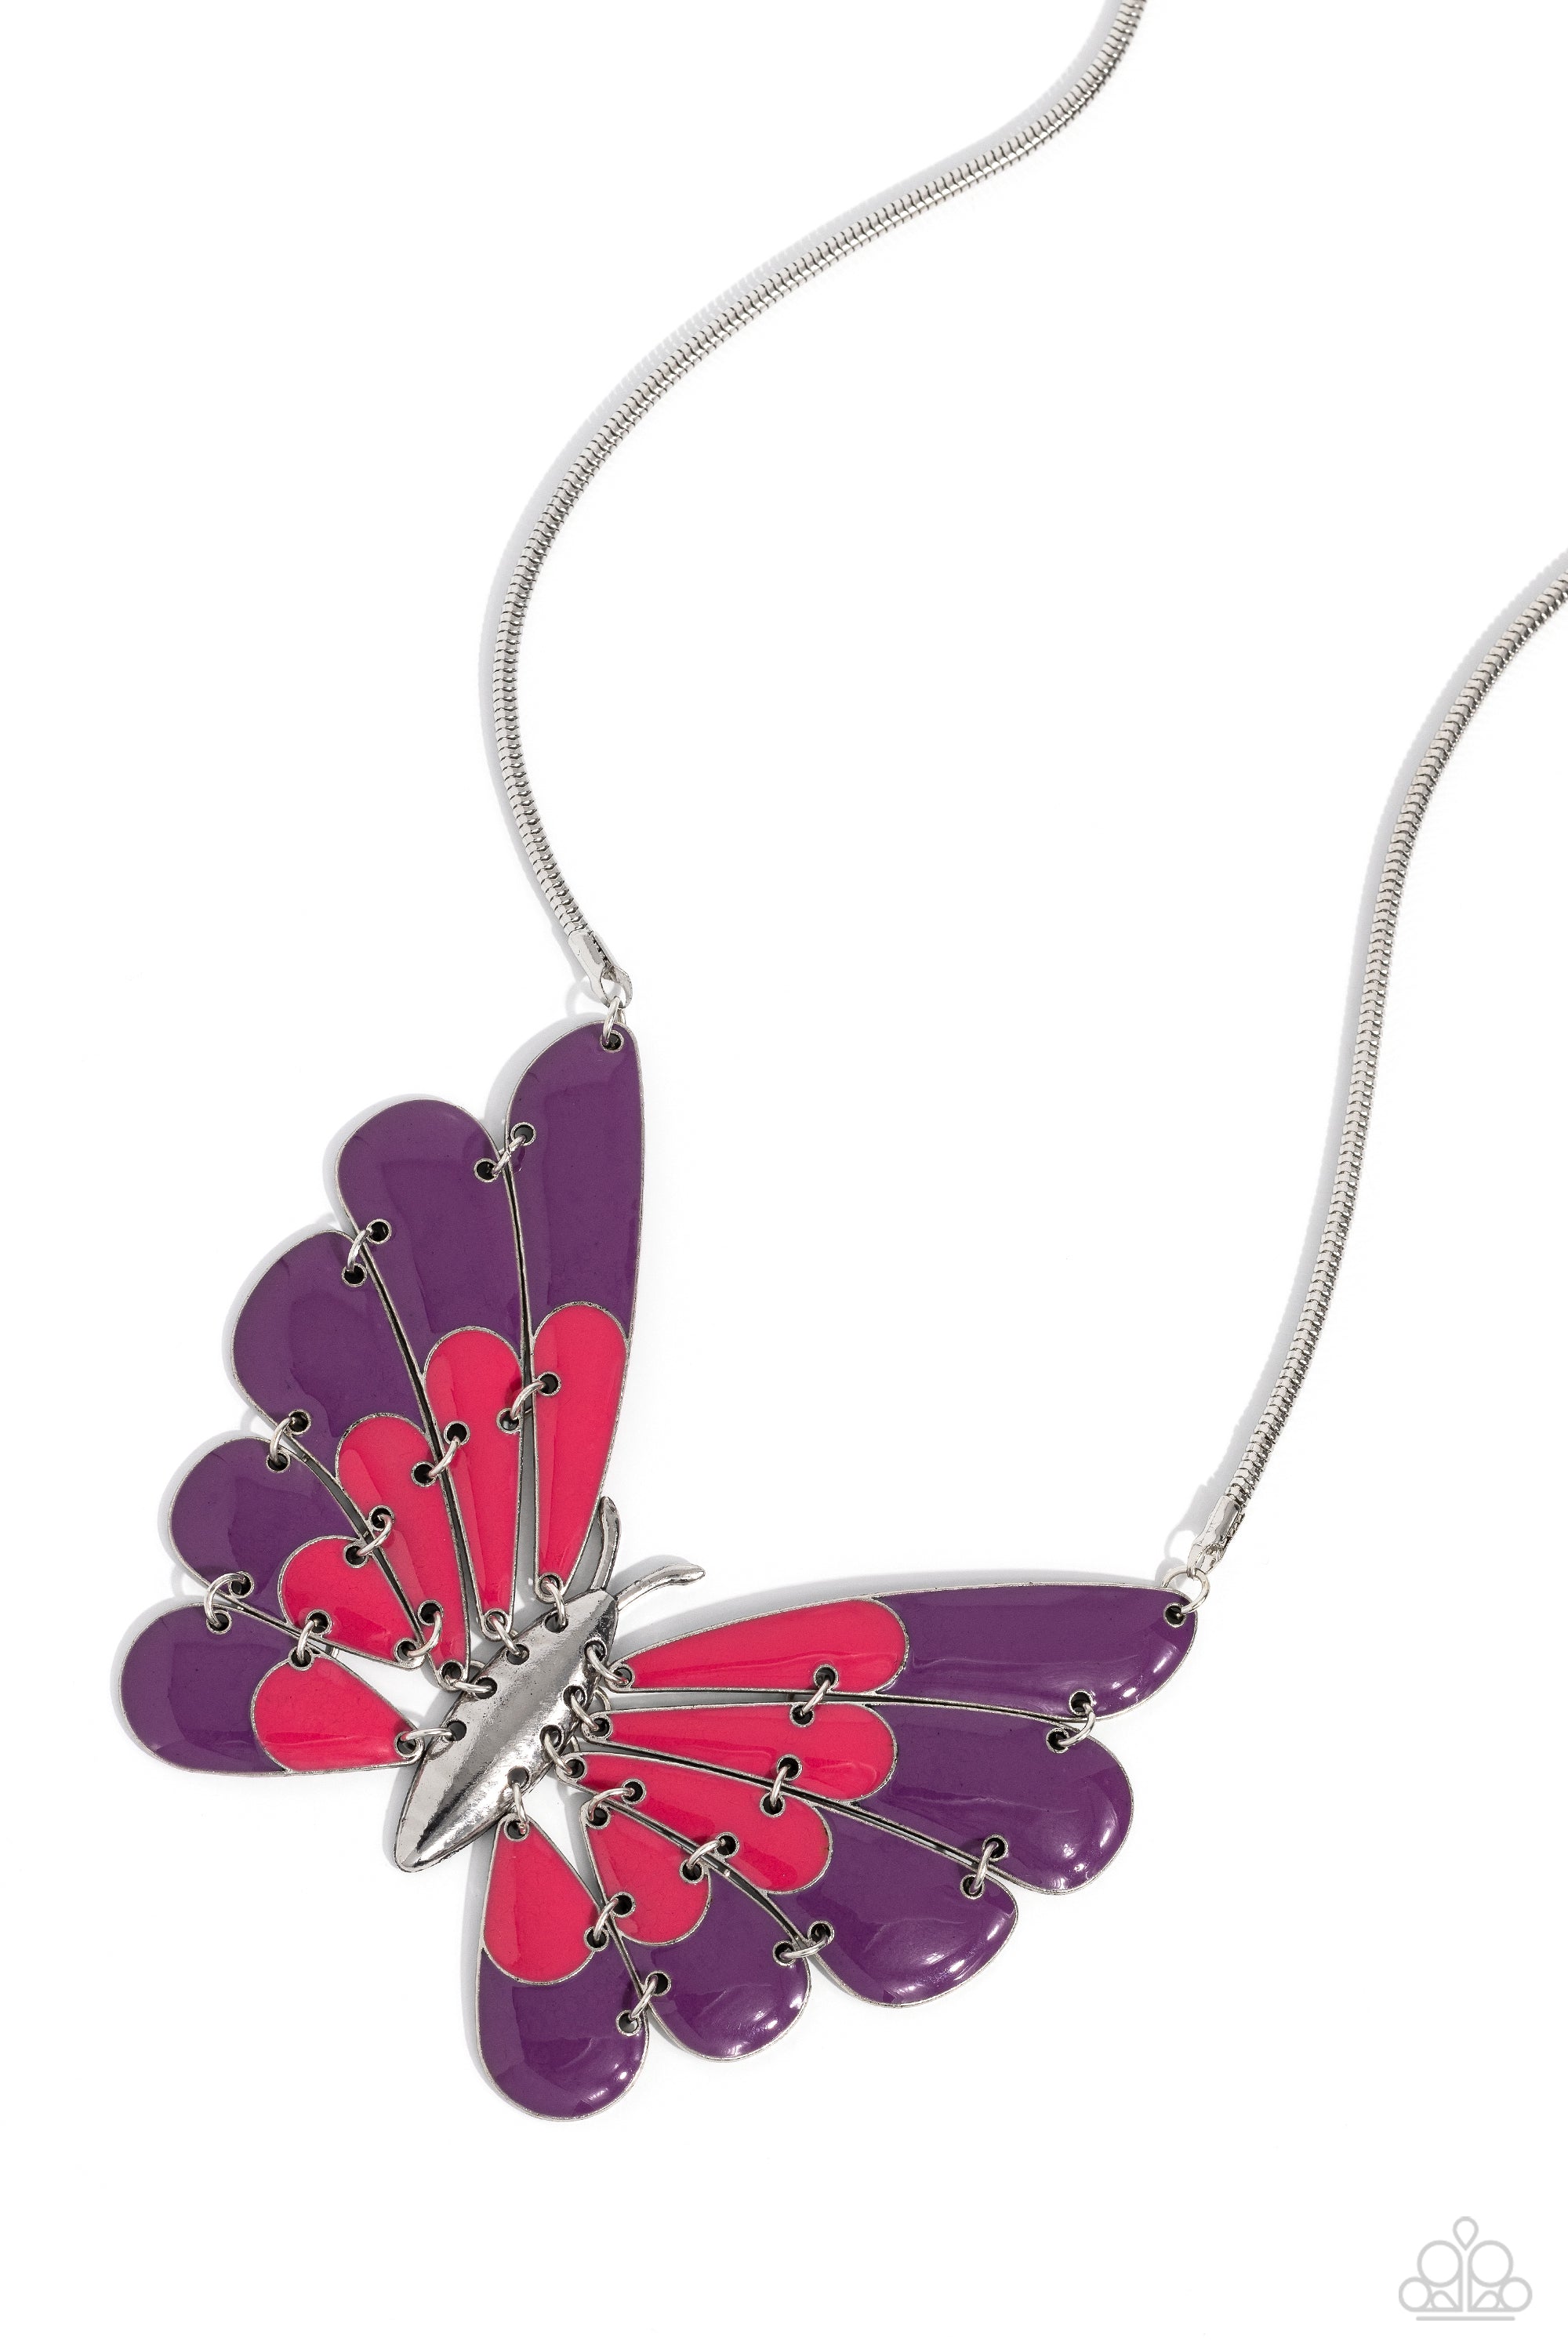 Moth Maven Purple & Pink Necklace - Paparazzi Accessories- lightbox - CarasShop.com - $5 Jewelry by Cara Jewels